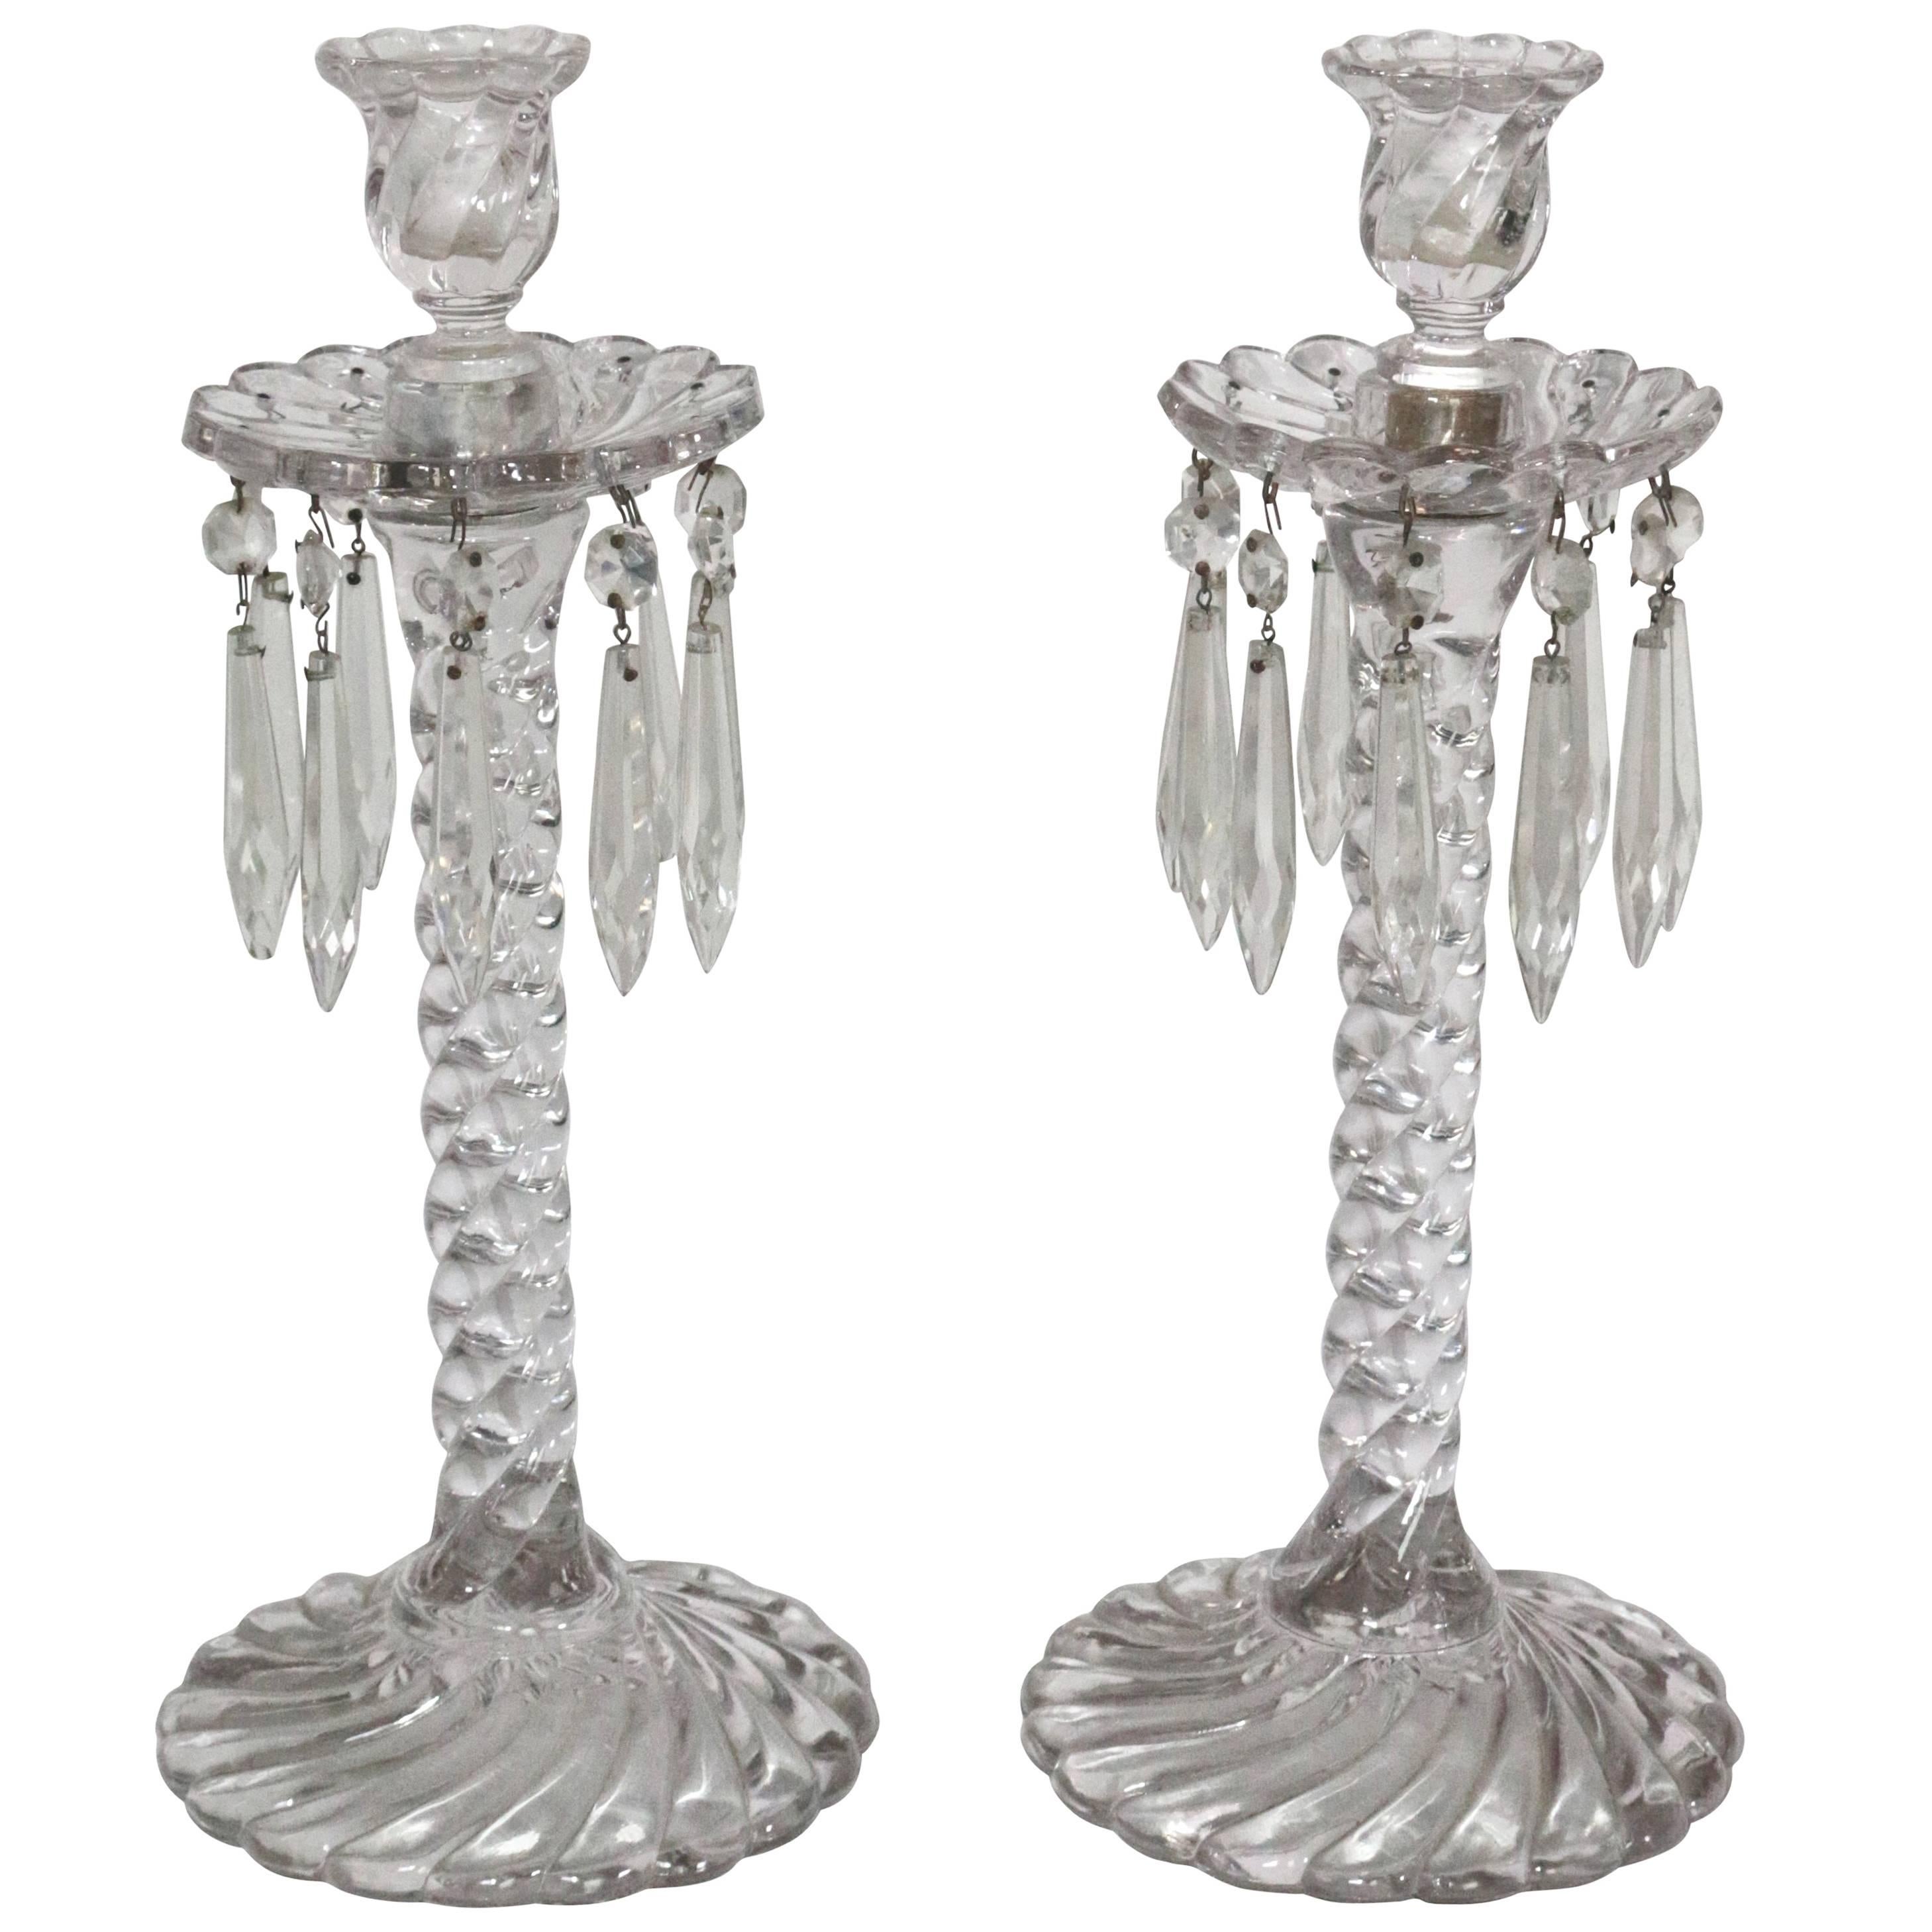 Baccarat Crystal Tall Pair of 19th Century Rope Twist Candlesticks